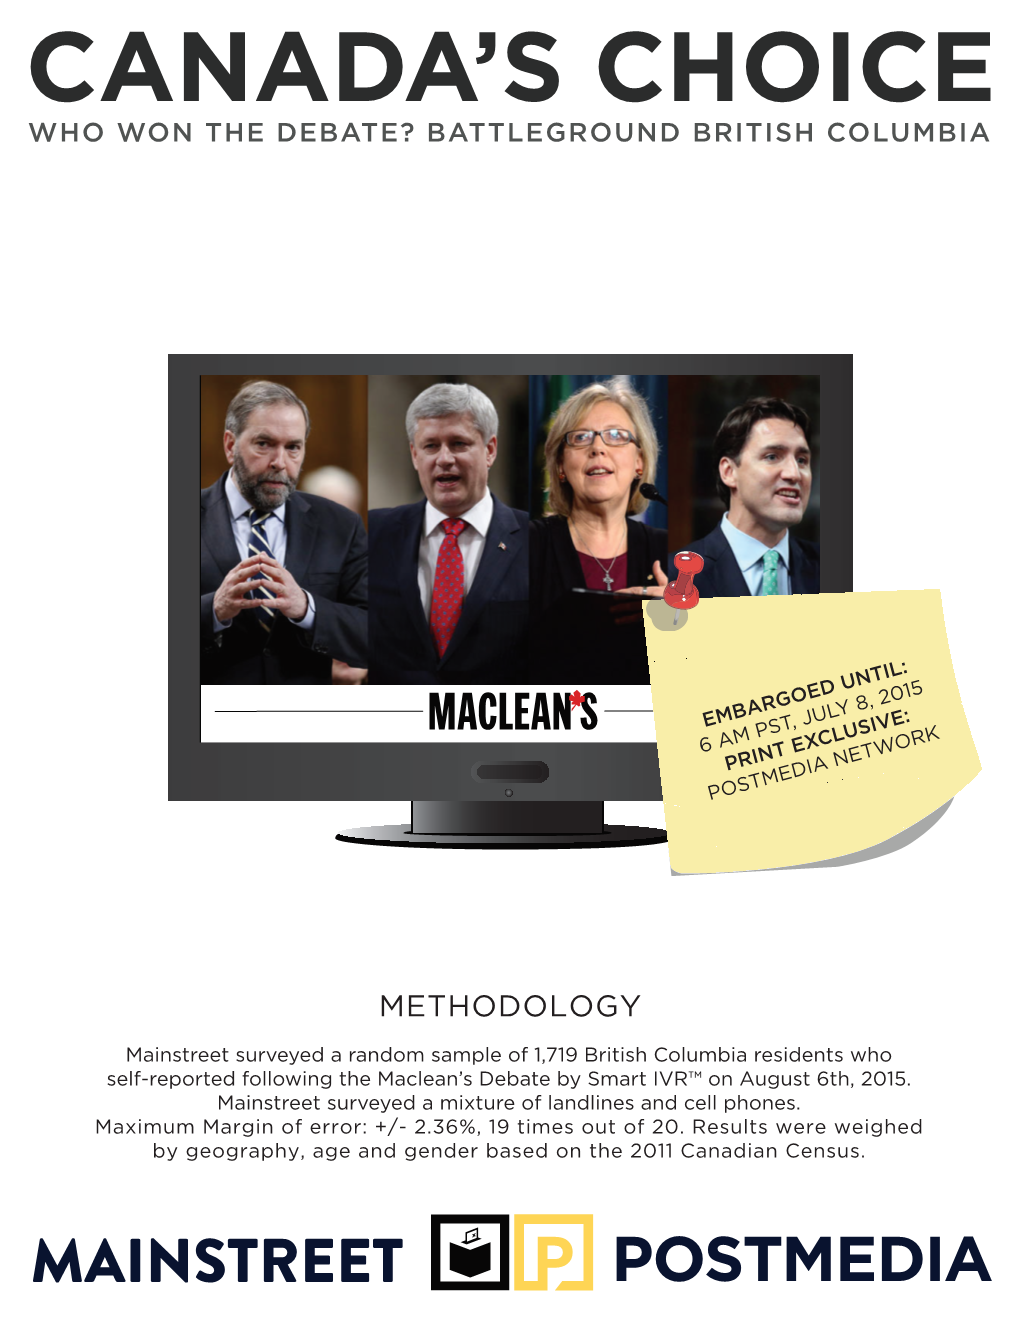 Mainstreet Surveyed a Random Sample of 1,719 British Columbia Residents Who Self-Reported Following the Maclean’S Debate by Smart IVR™ on August 6Th, 2015